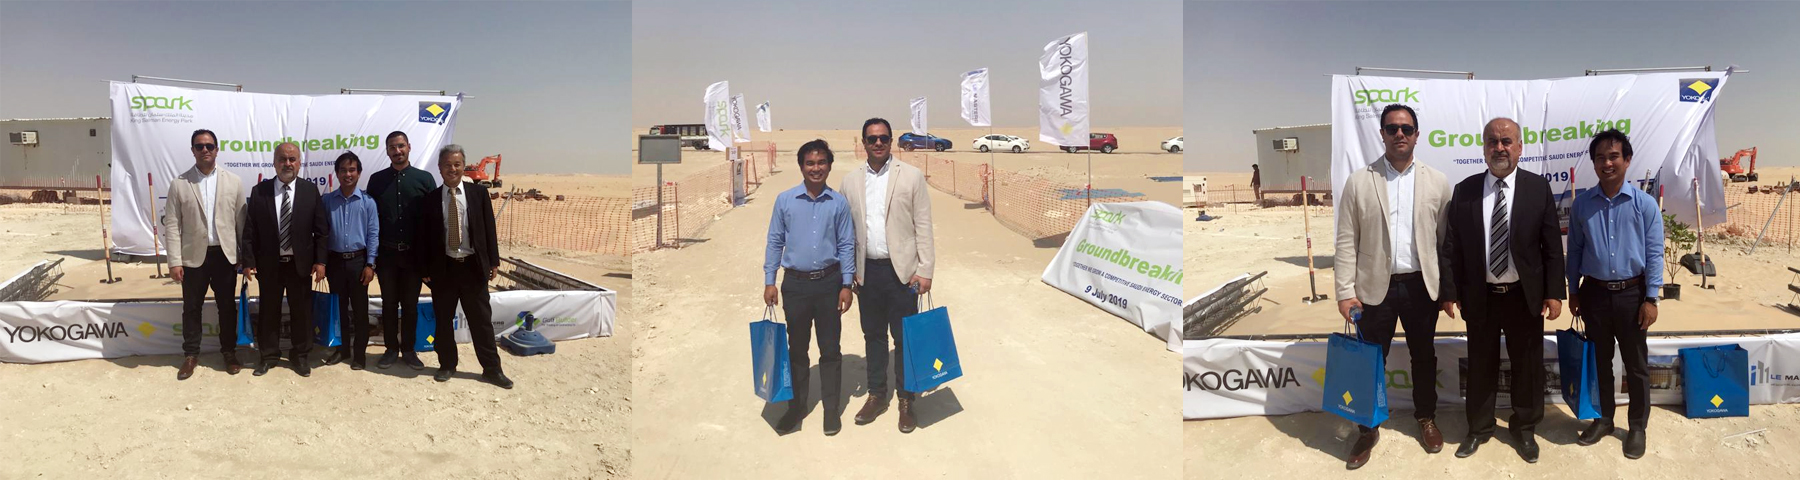 Le Masters Arabia participated in the ground breaking ceremony